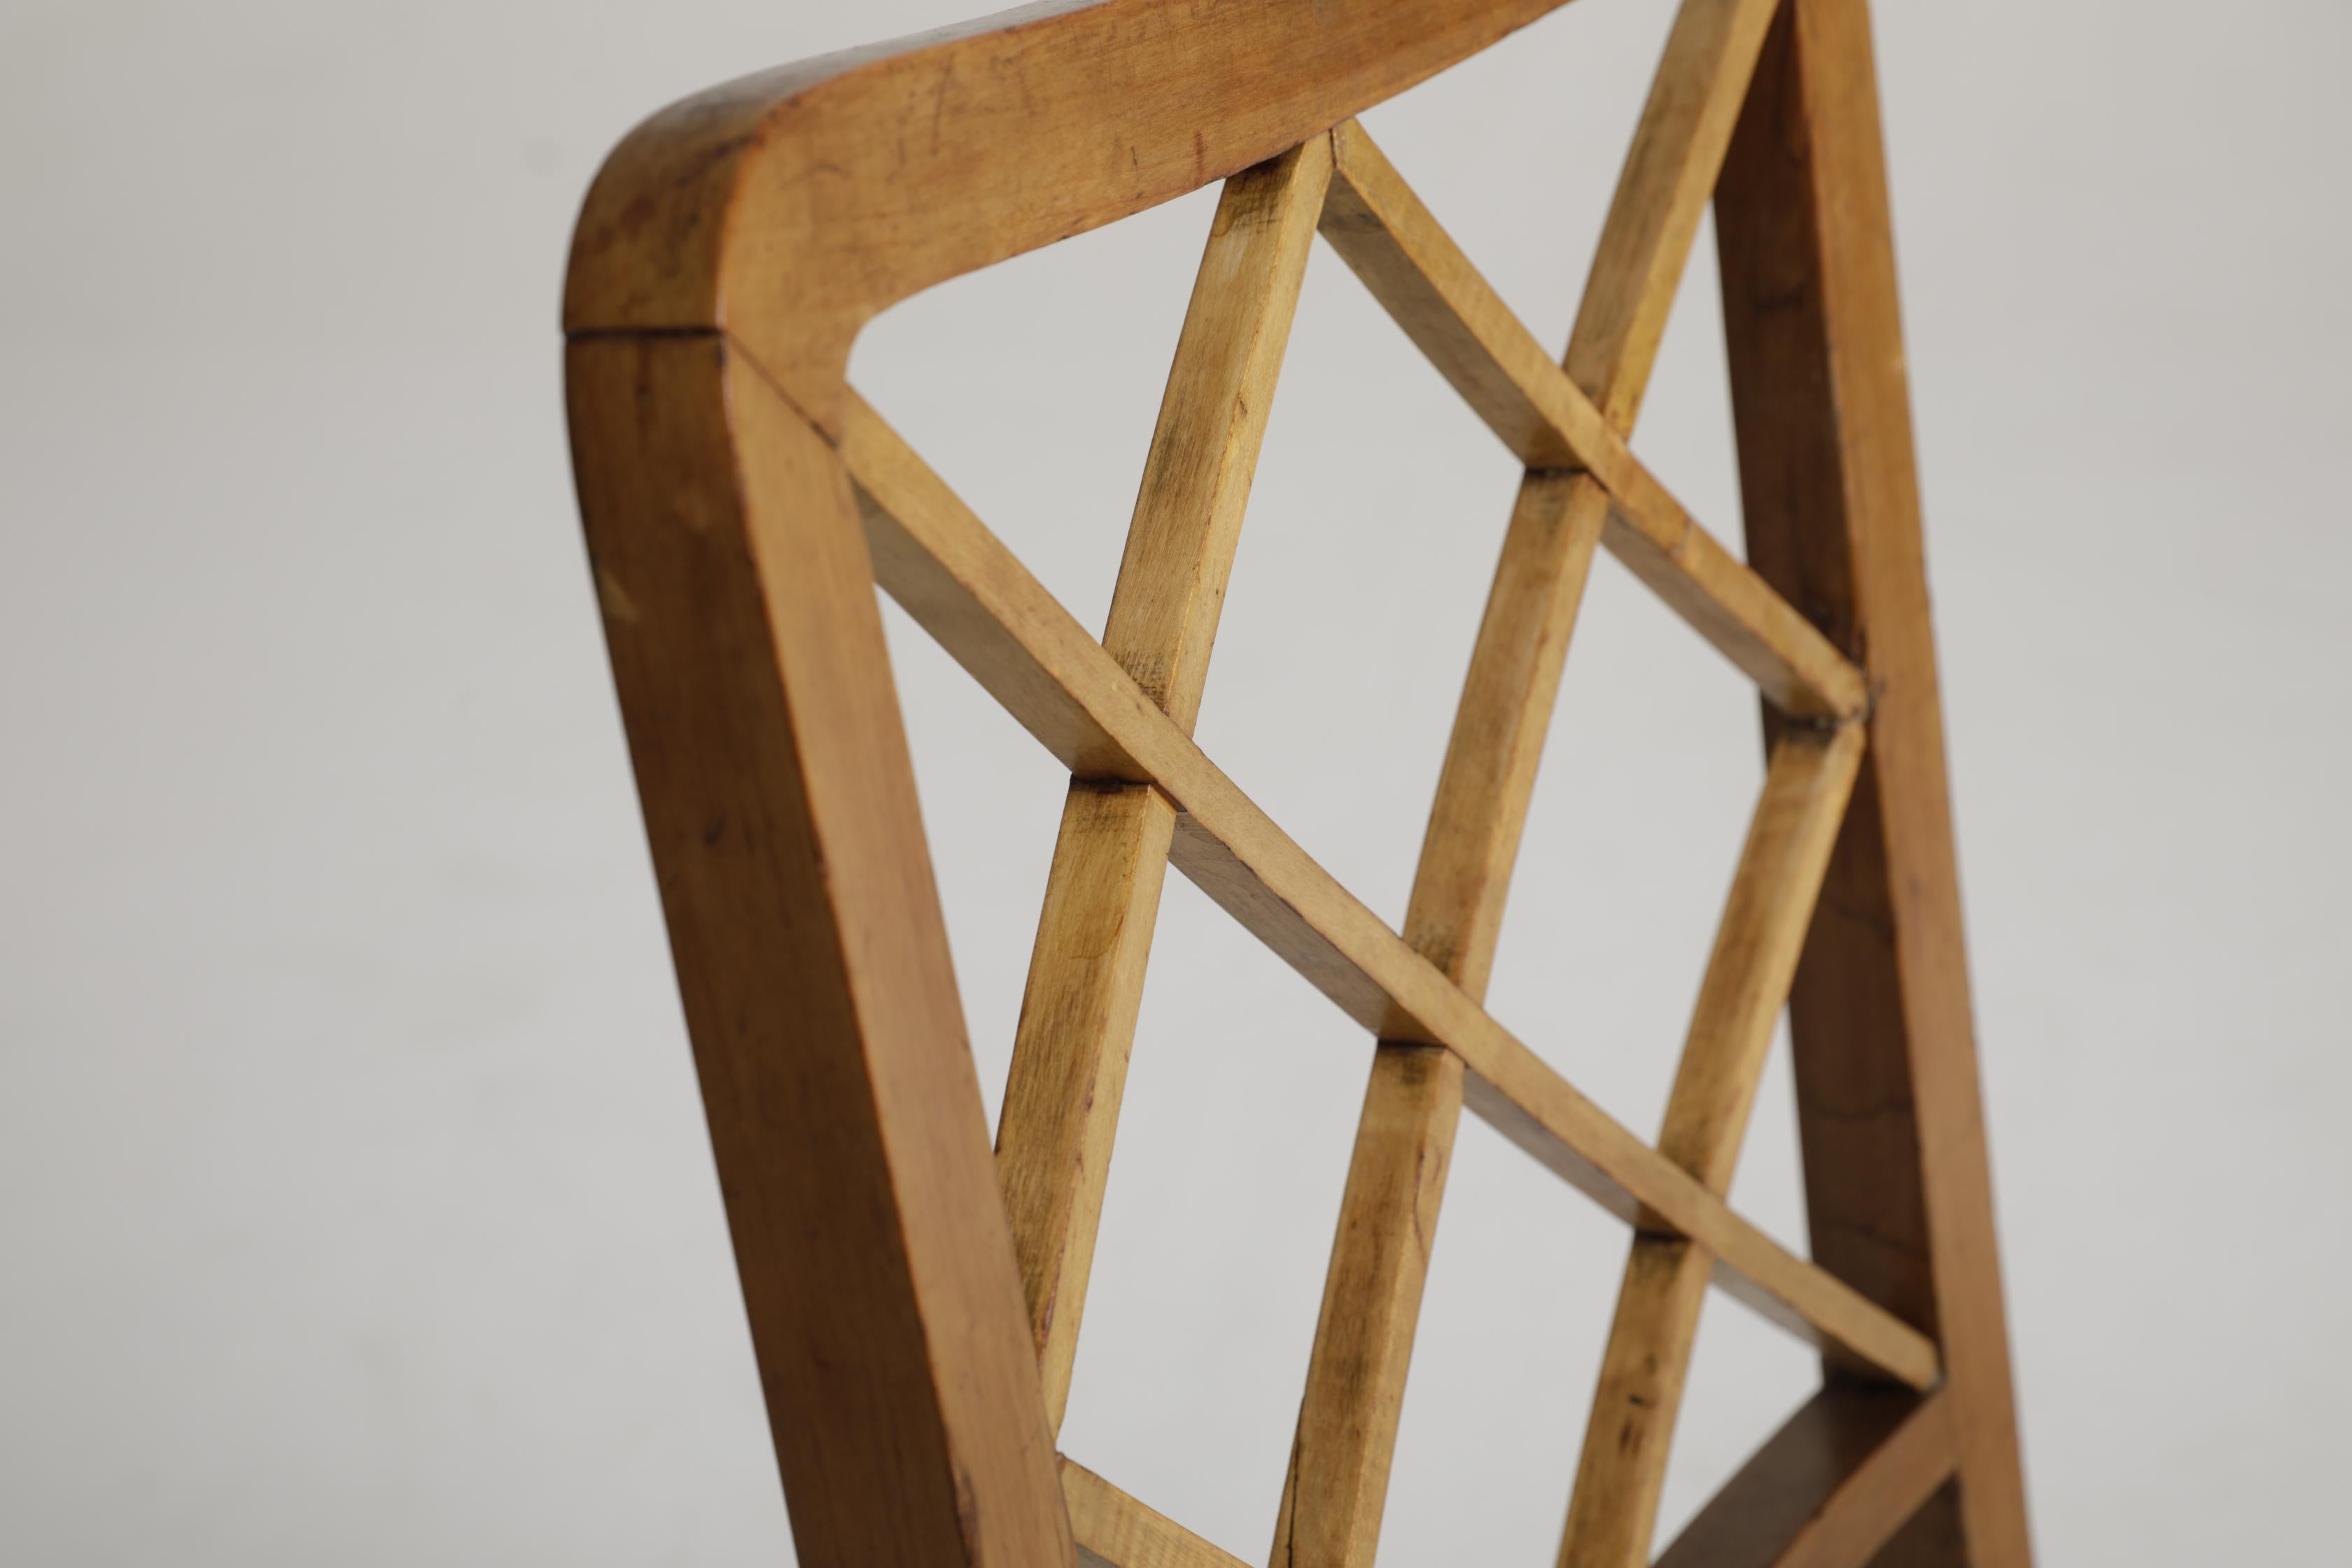 Pair of chairs with wooden structure and seat covered in white bouclé fabric, attributed to the Milanese architect and designer Paolo Buffa (1930-1970), an author who trained in Gio Ponti's studio. The decorative trellis motif of the back, typical